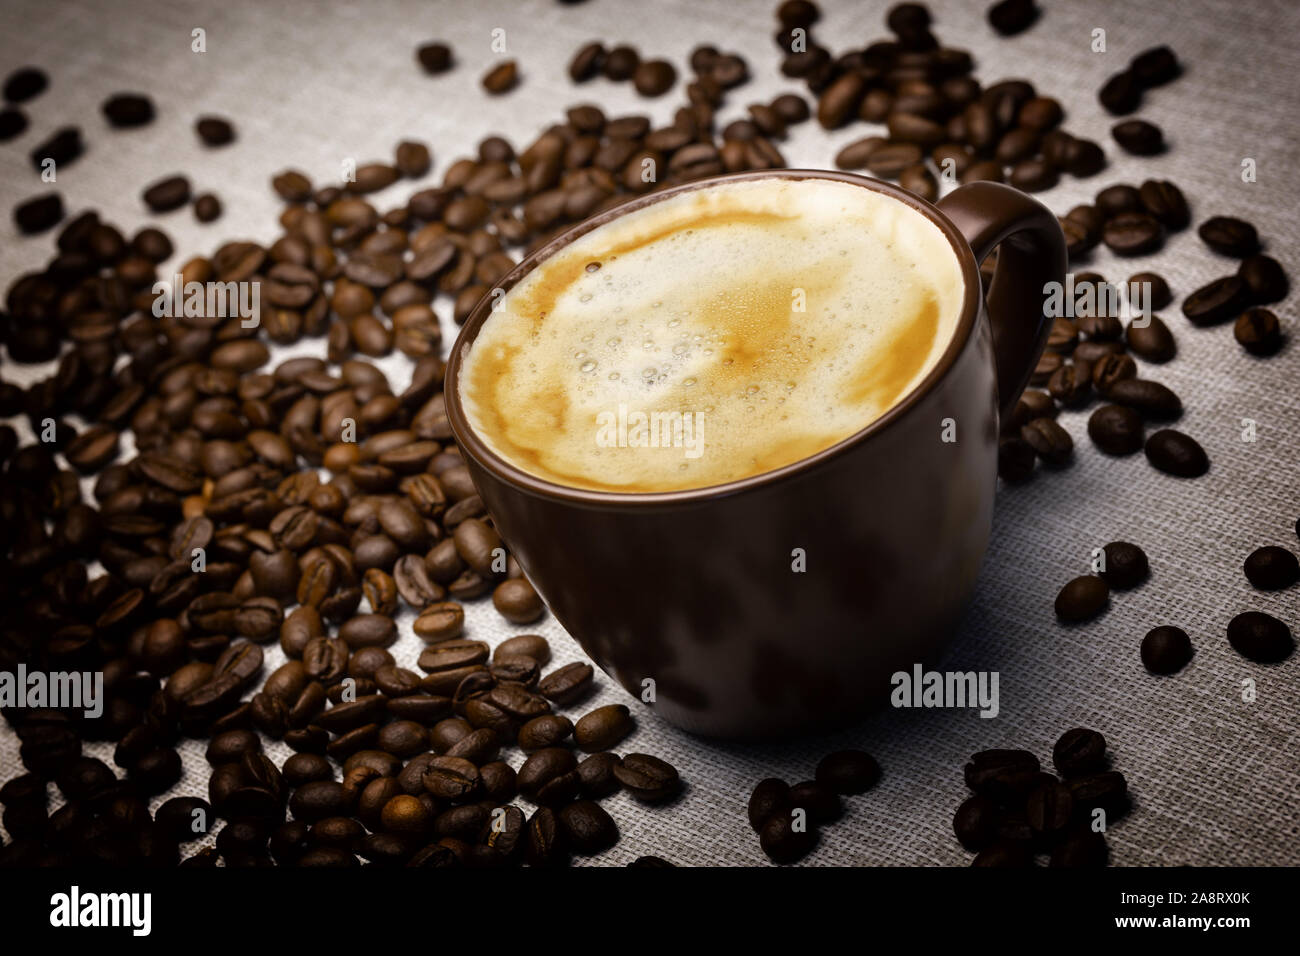 A cup of fresh coffee with foam on the table laid by burlap and scattered grains of coffee Stock Photo